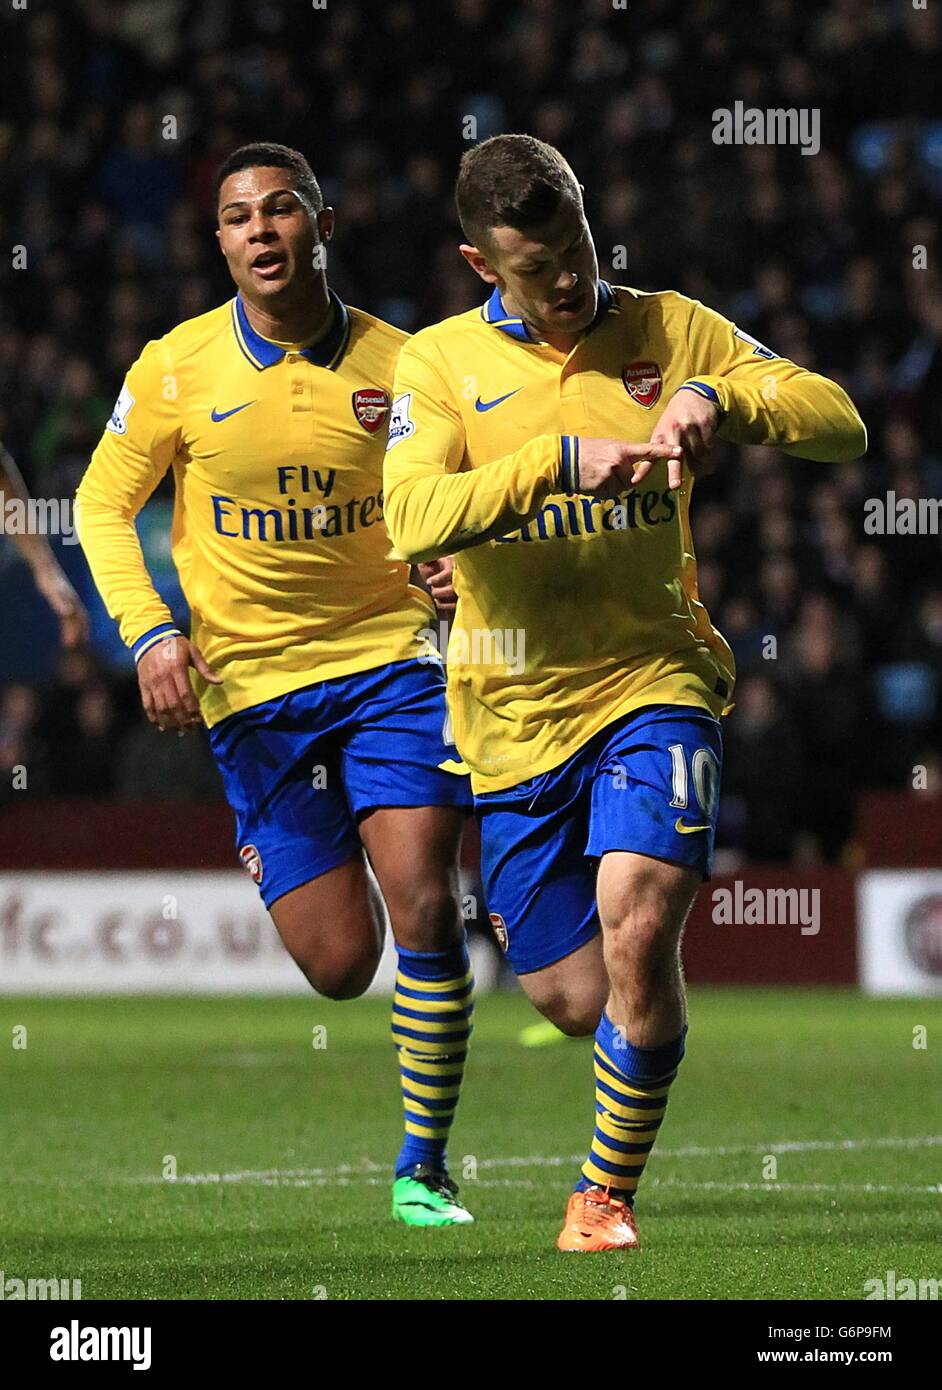 Arsenal's Jack Wilshere (right) celebrates scoring his teams opening goal with teammate Serge Gnabry Stock Photo